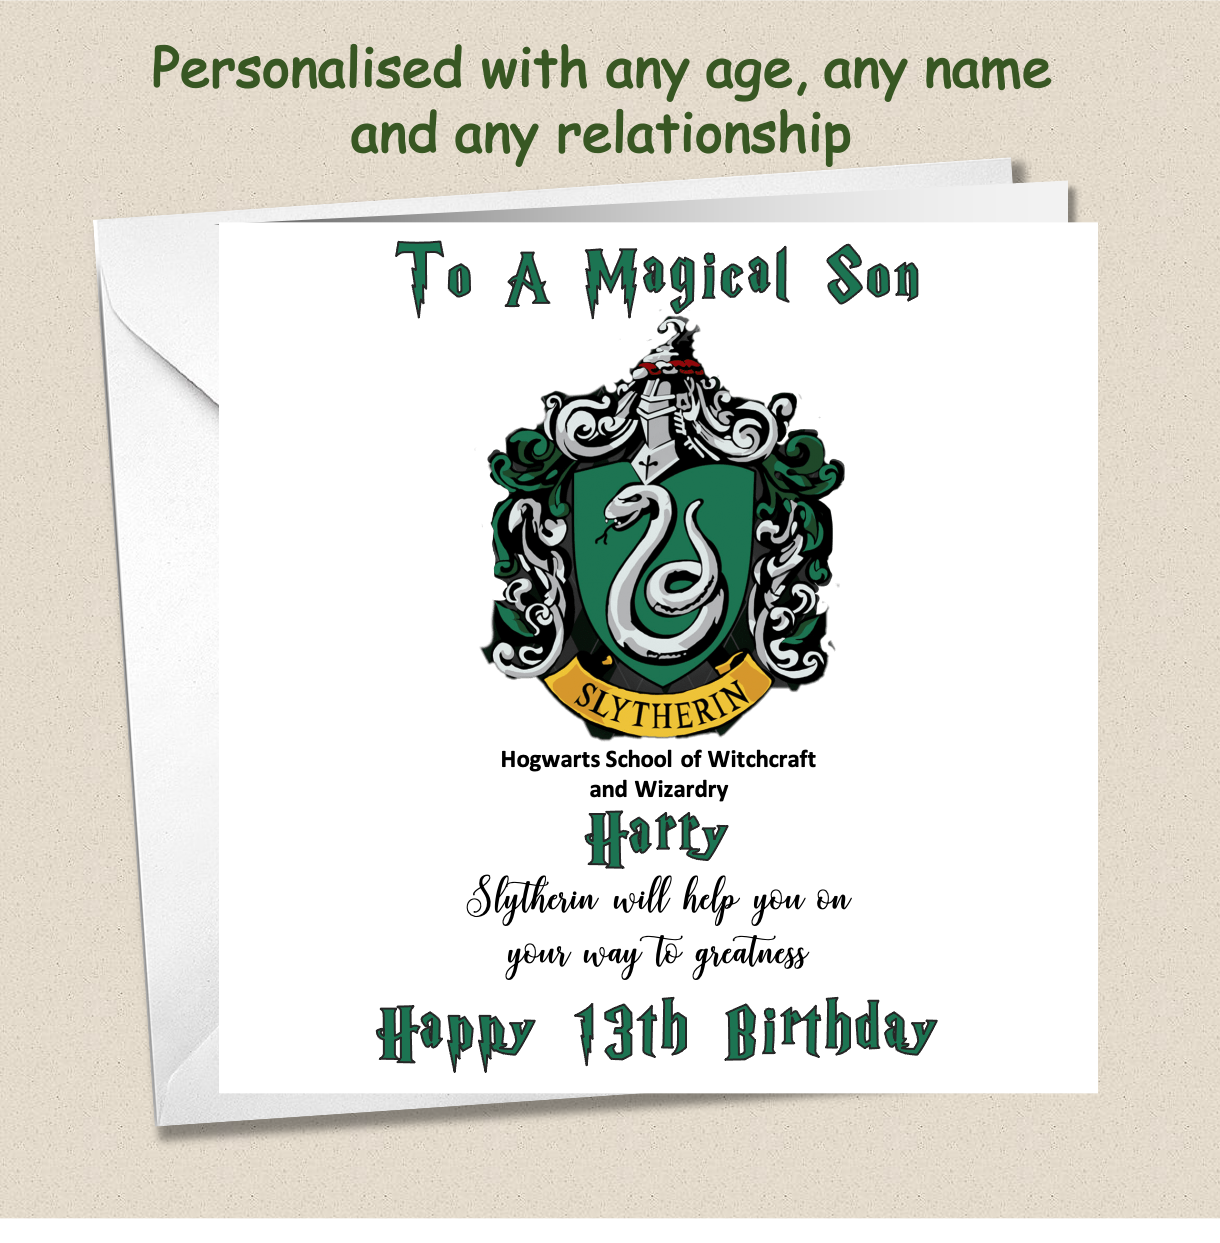 Personalised Slytherin (Harry Potter Inspired) Birthday Card Teenagers